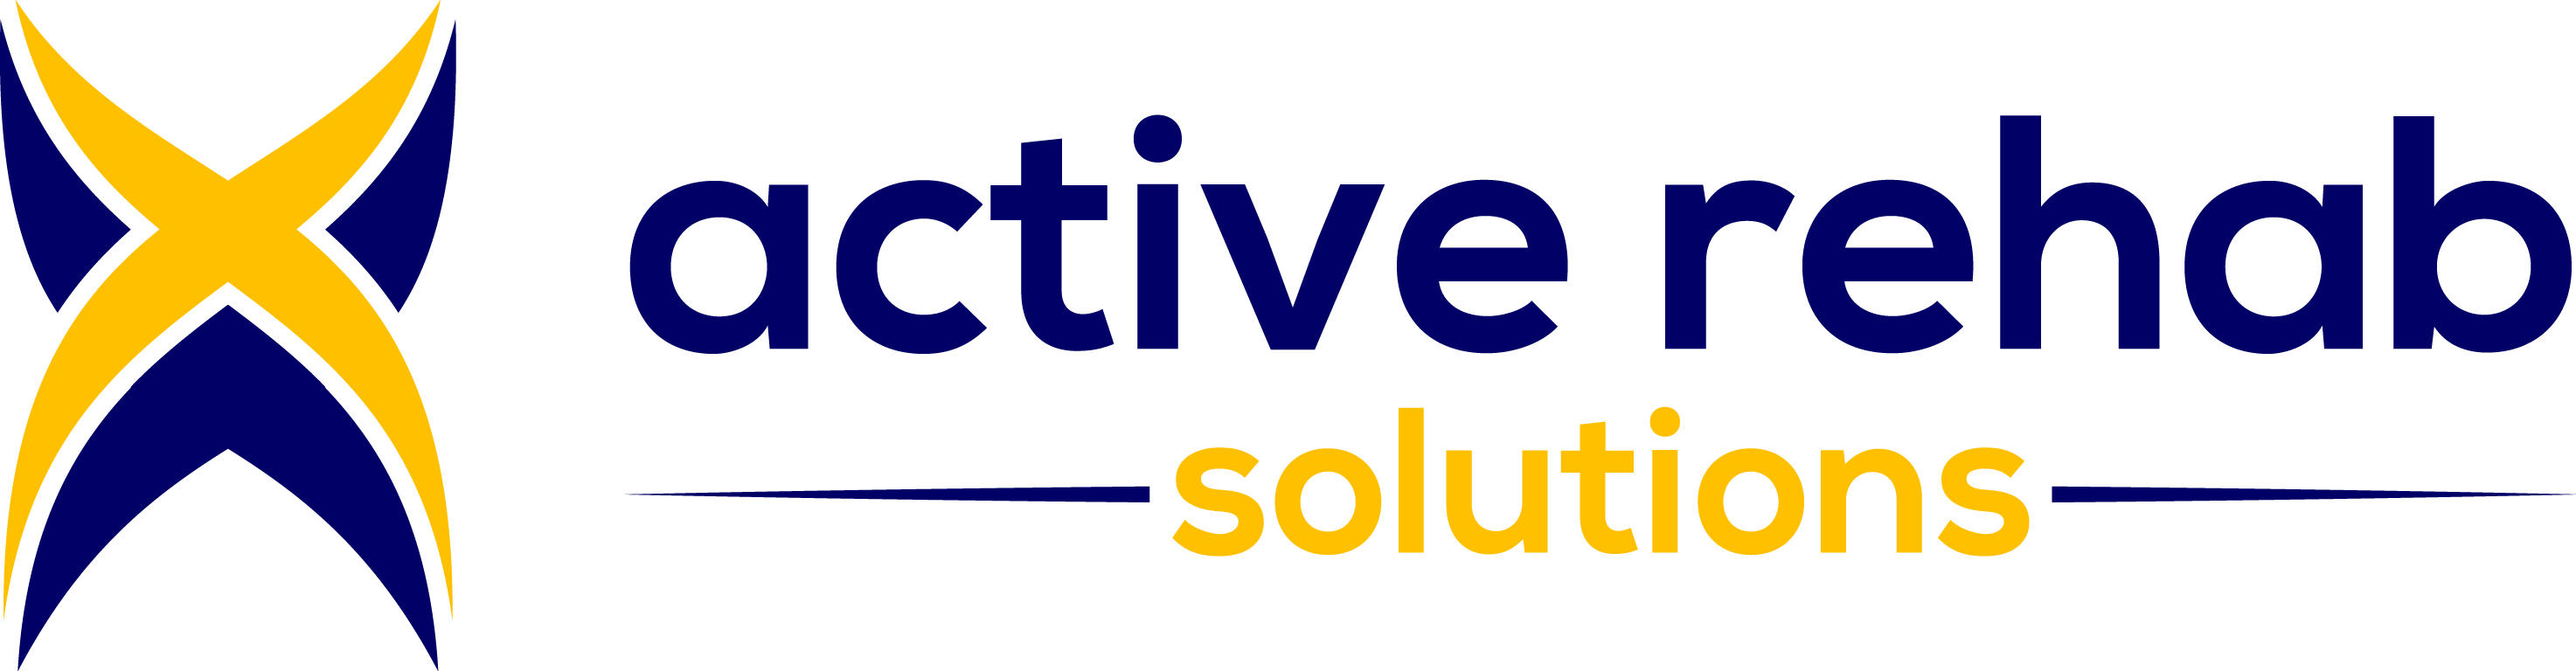 active rehab solutions logo